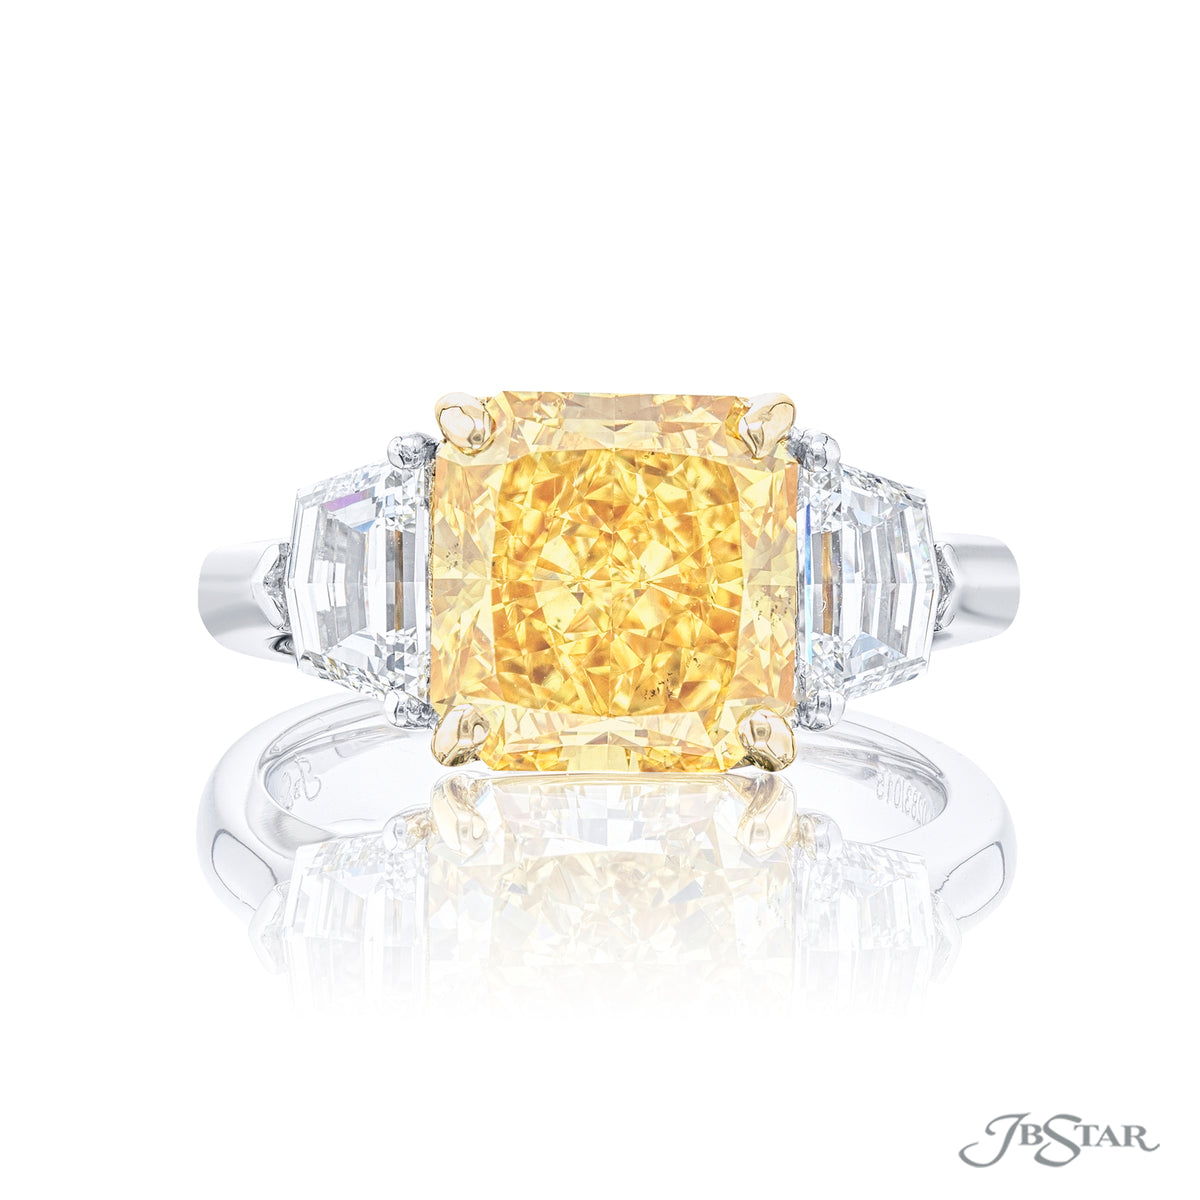 JB Star Platinum and 18K Yellow Gold Ring with a 4.57ct Fancy Deep Yellow Radiant Cut Diamond